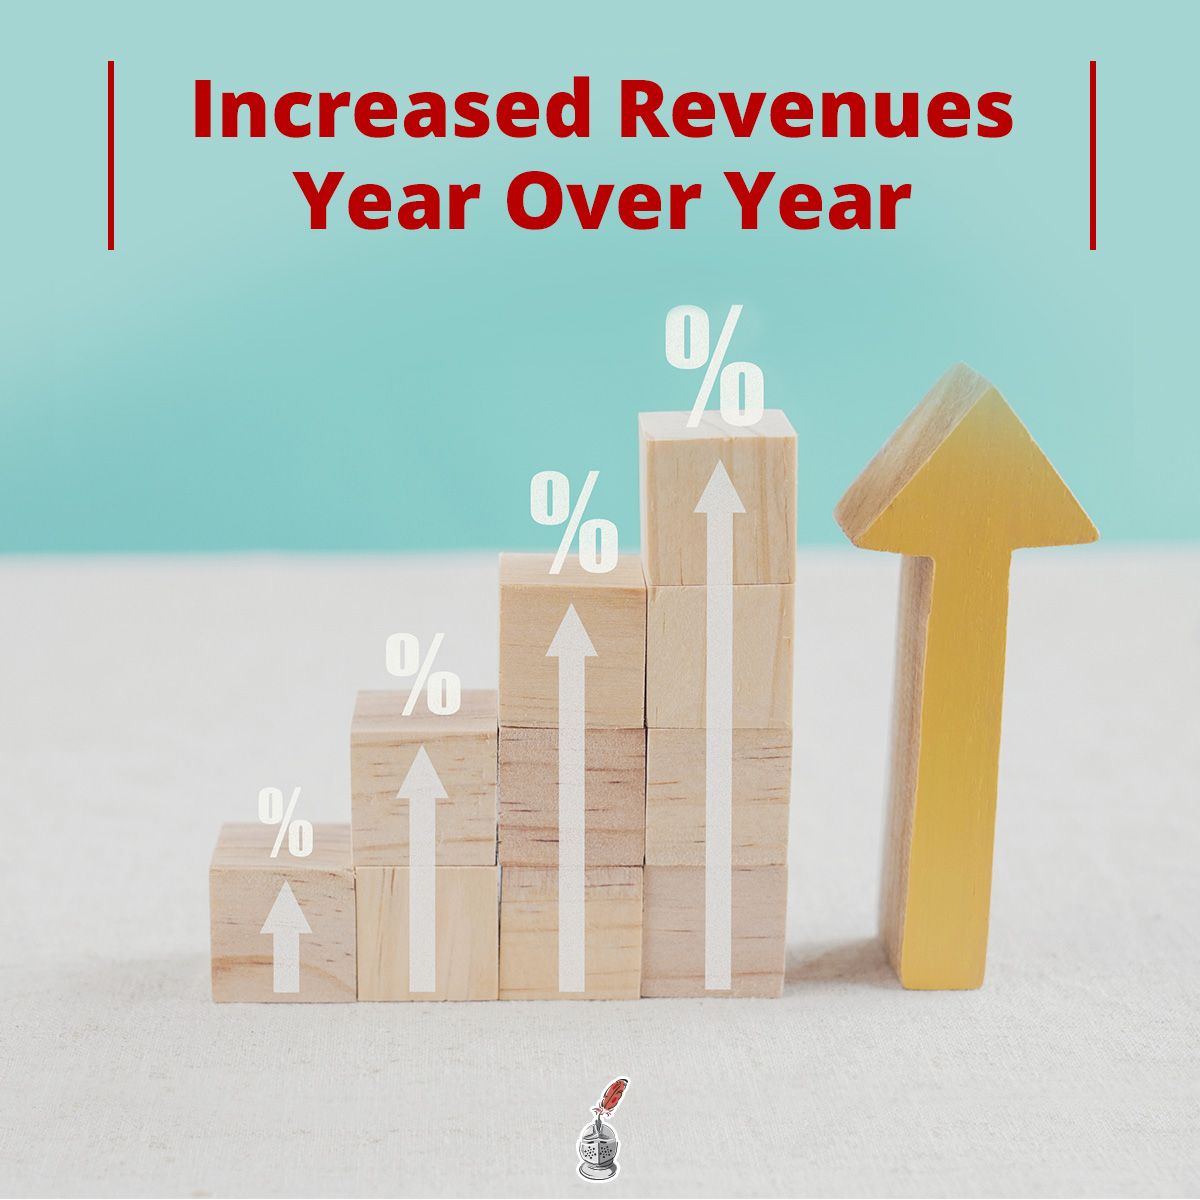 Increased Revenues Year Over Year